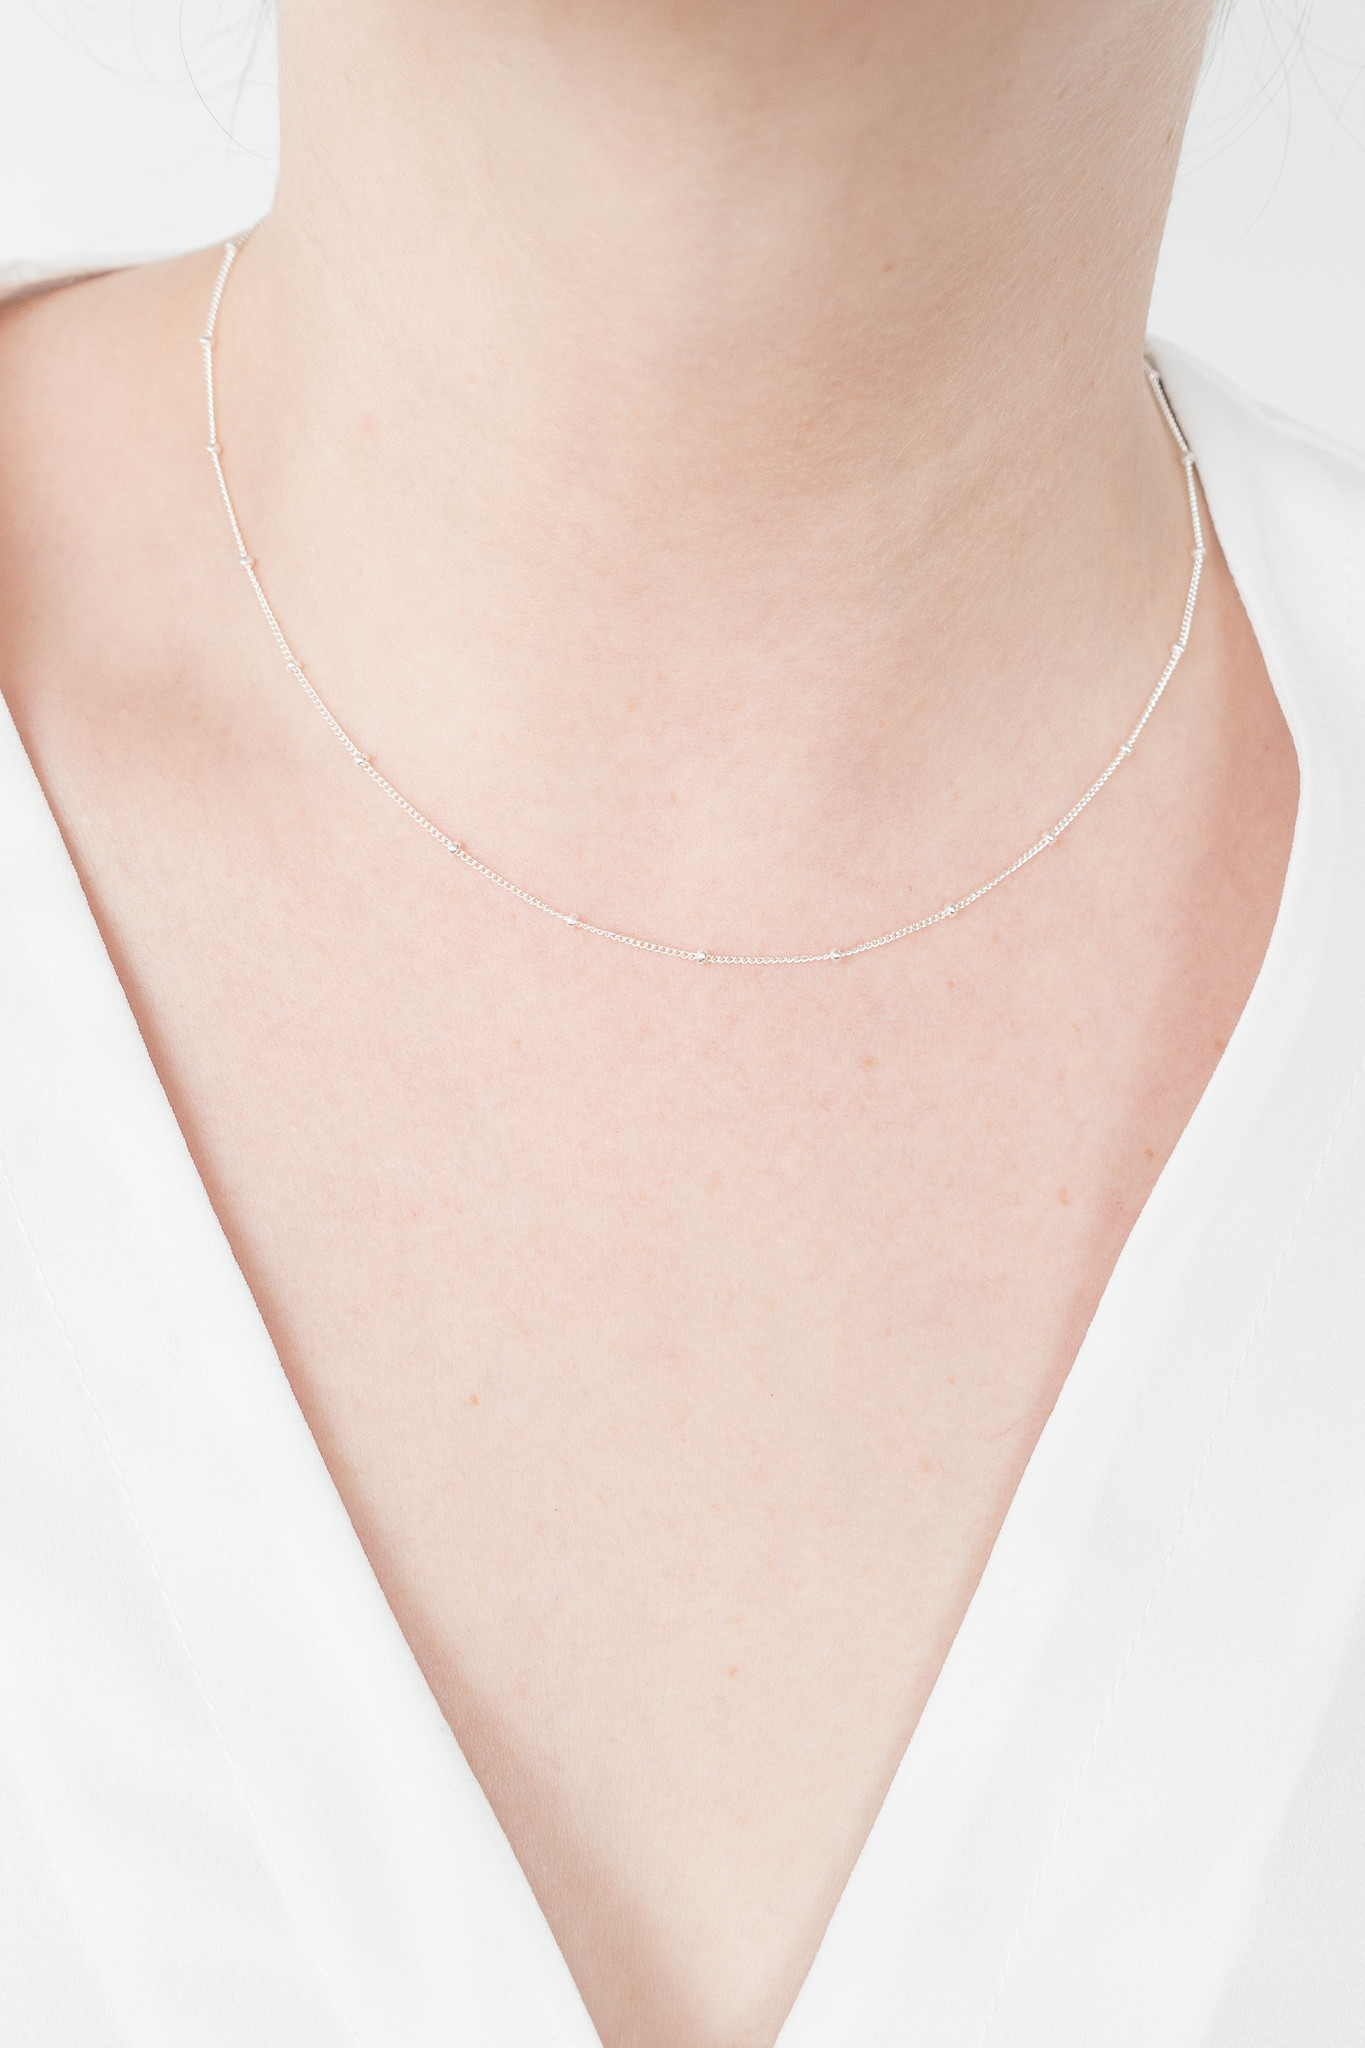 Introducing: The Satellite Chain Necklace